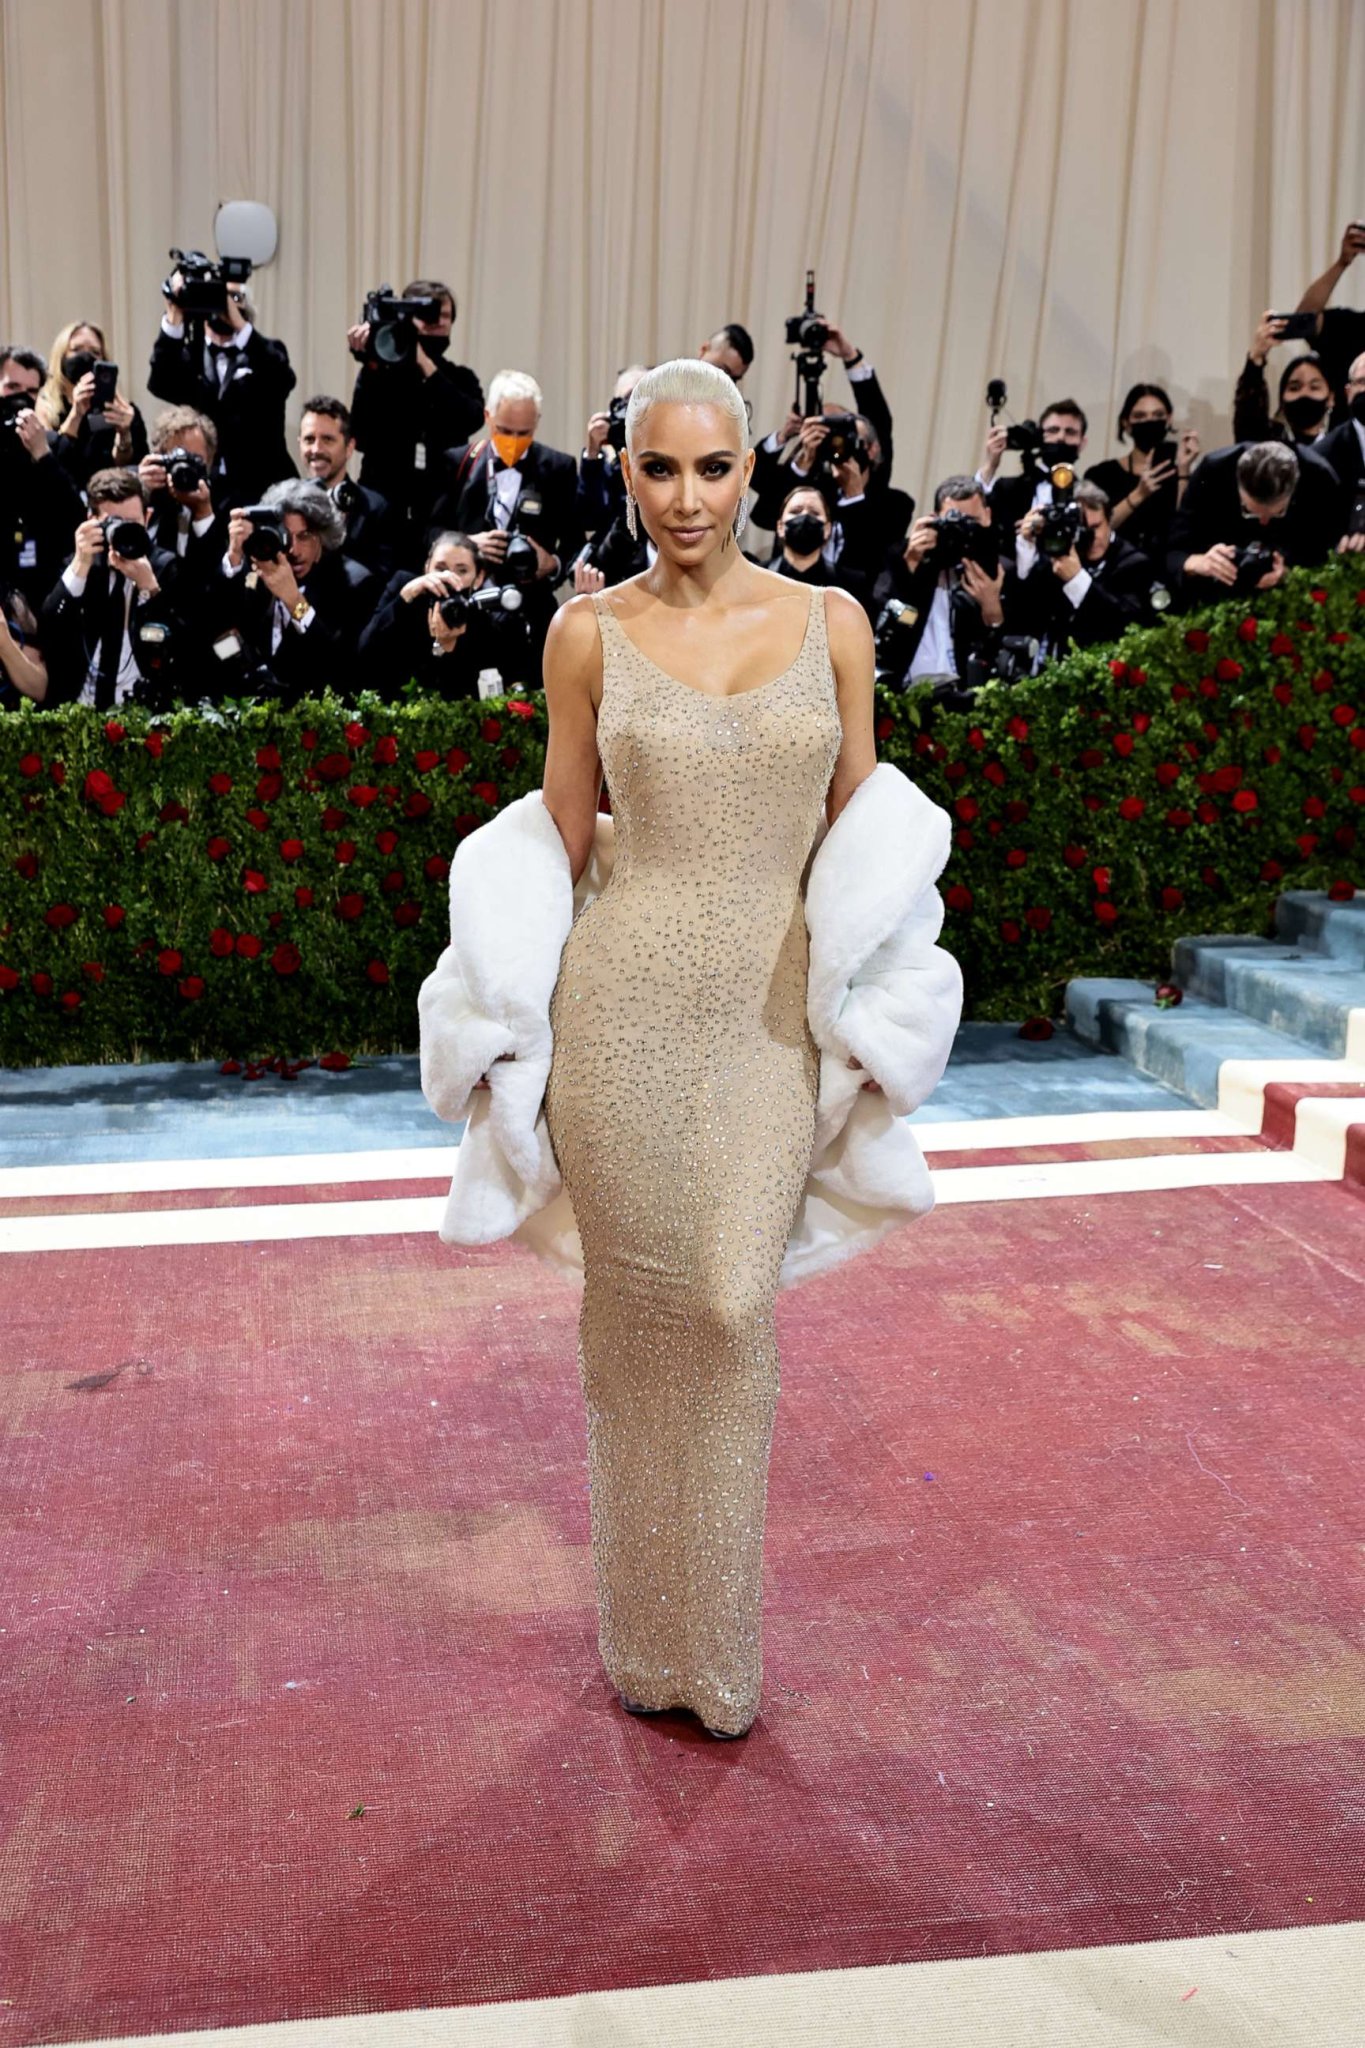 Met Gala: Most memorable fashions of all time